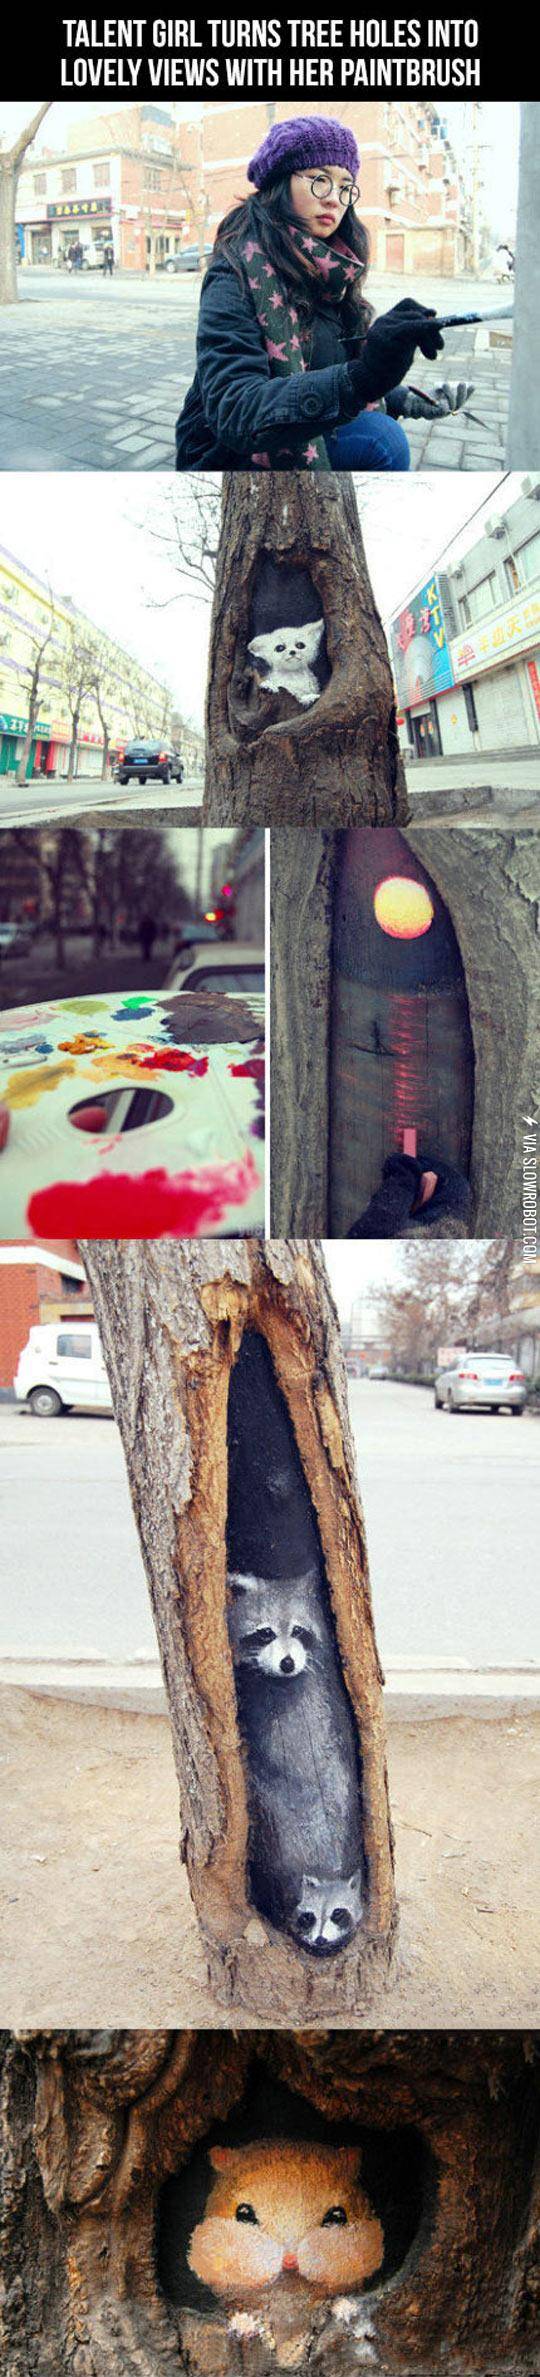 Clever+Art+Inside+Tree+Holes